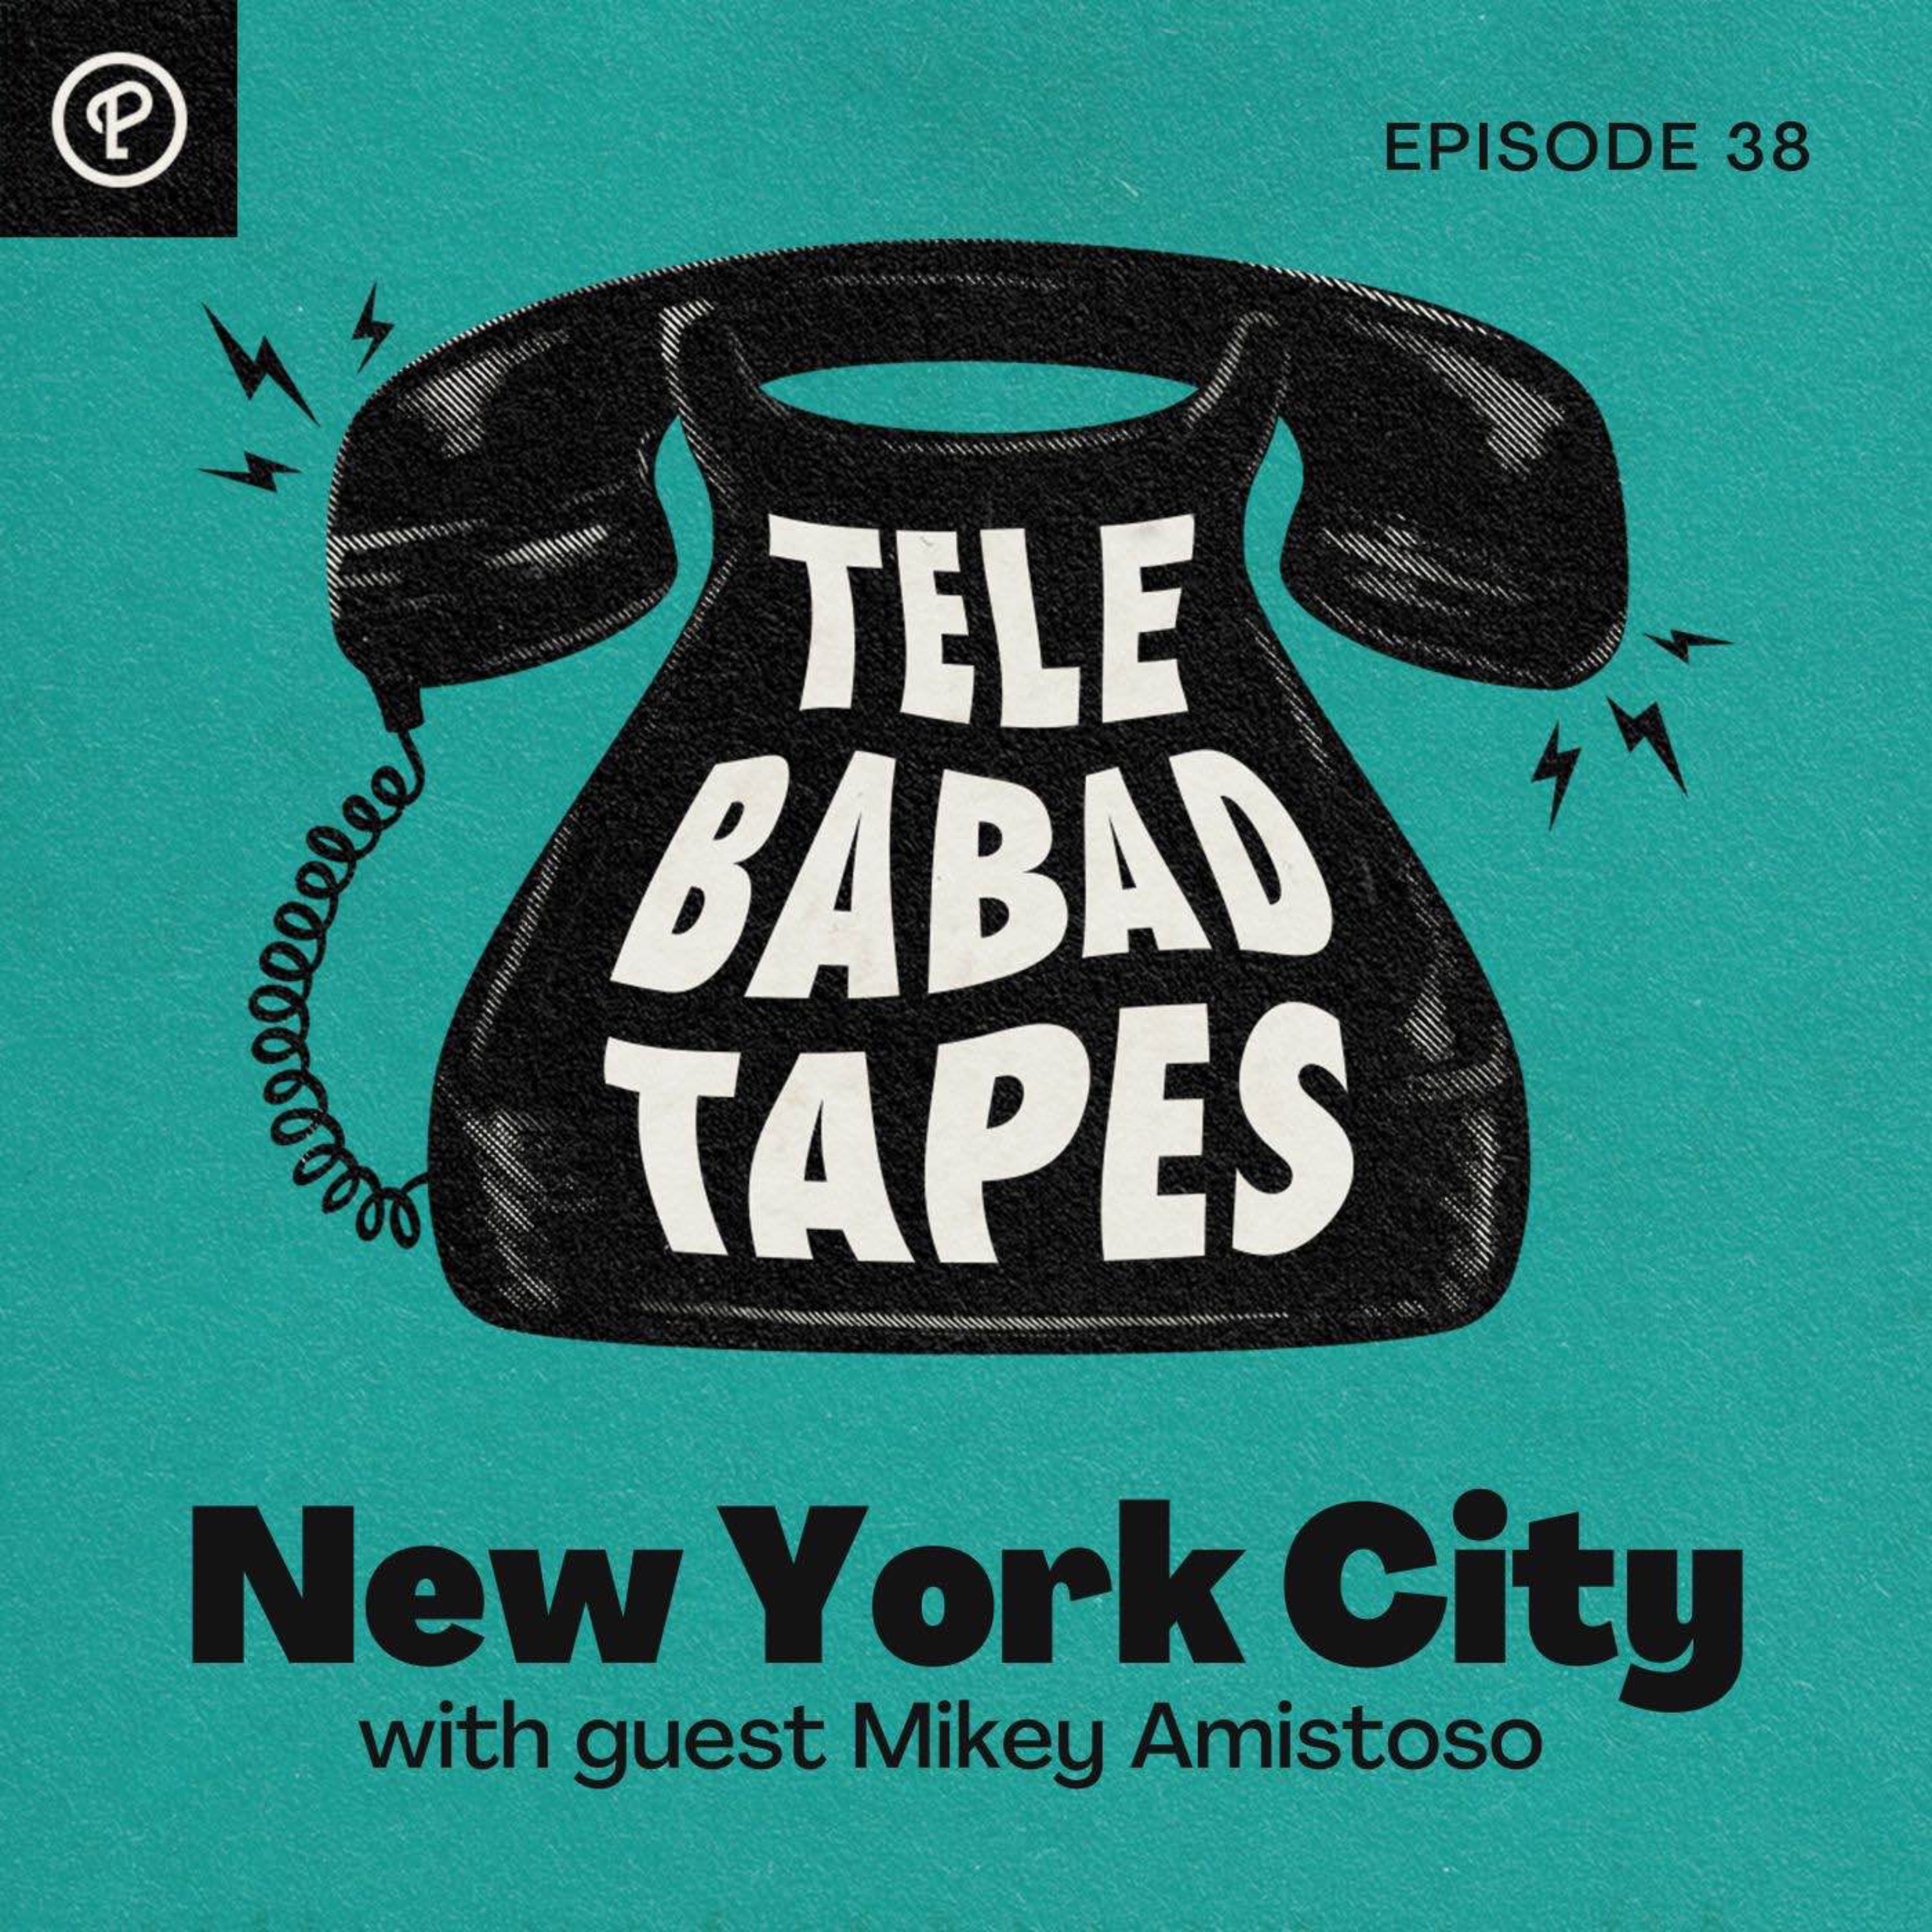 Episode 38: New York City with guest Mikey Amistoso